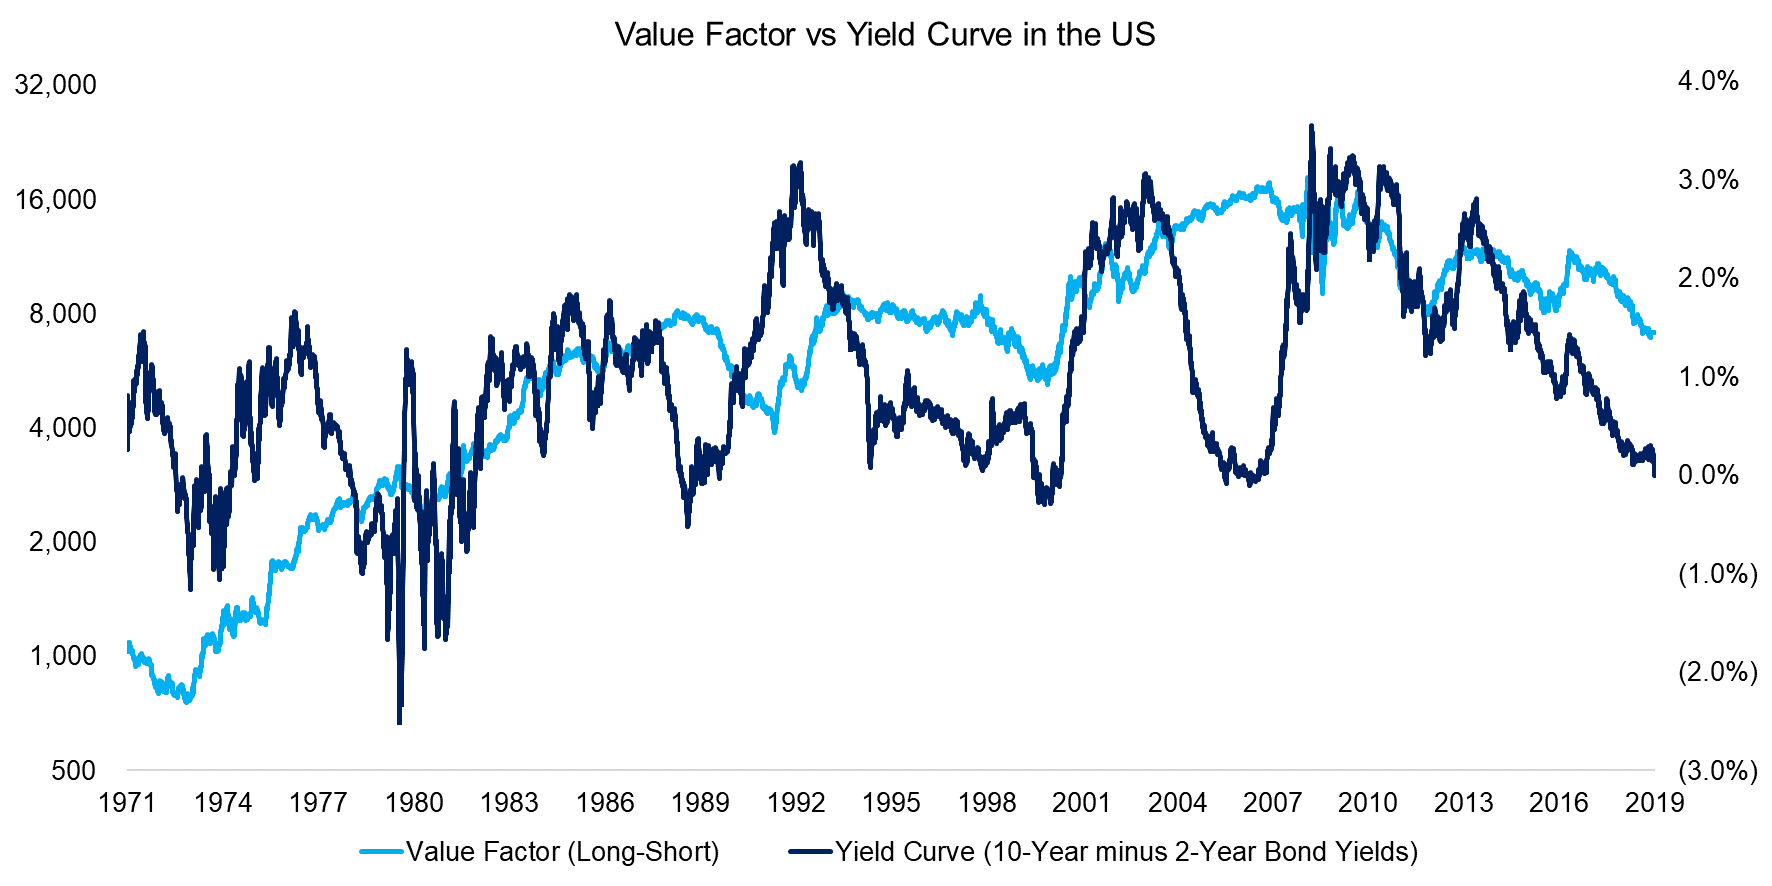 Value Factor vs Yield Curve in the US